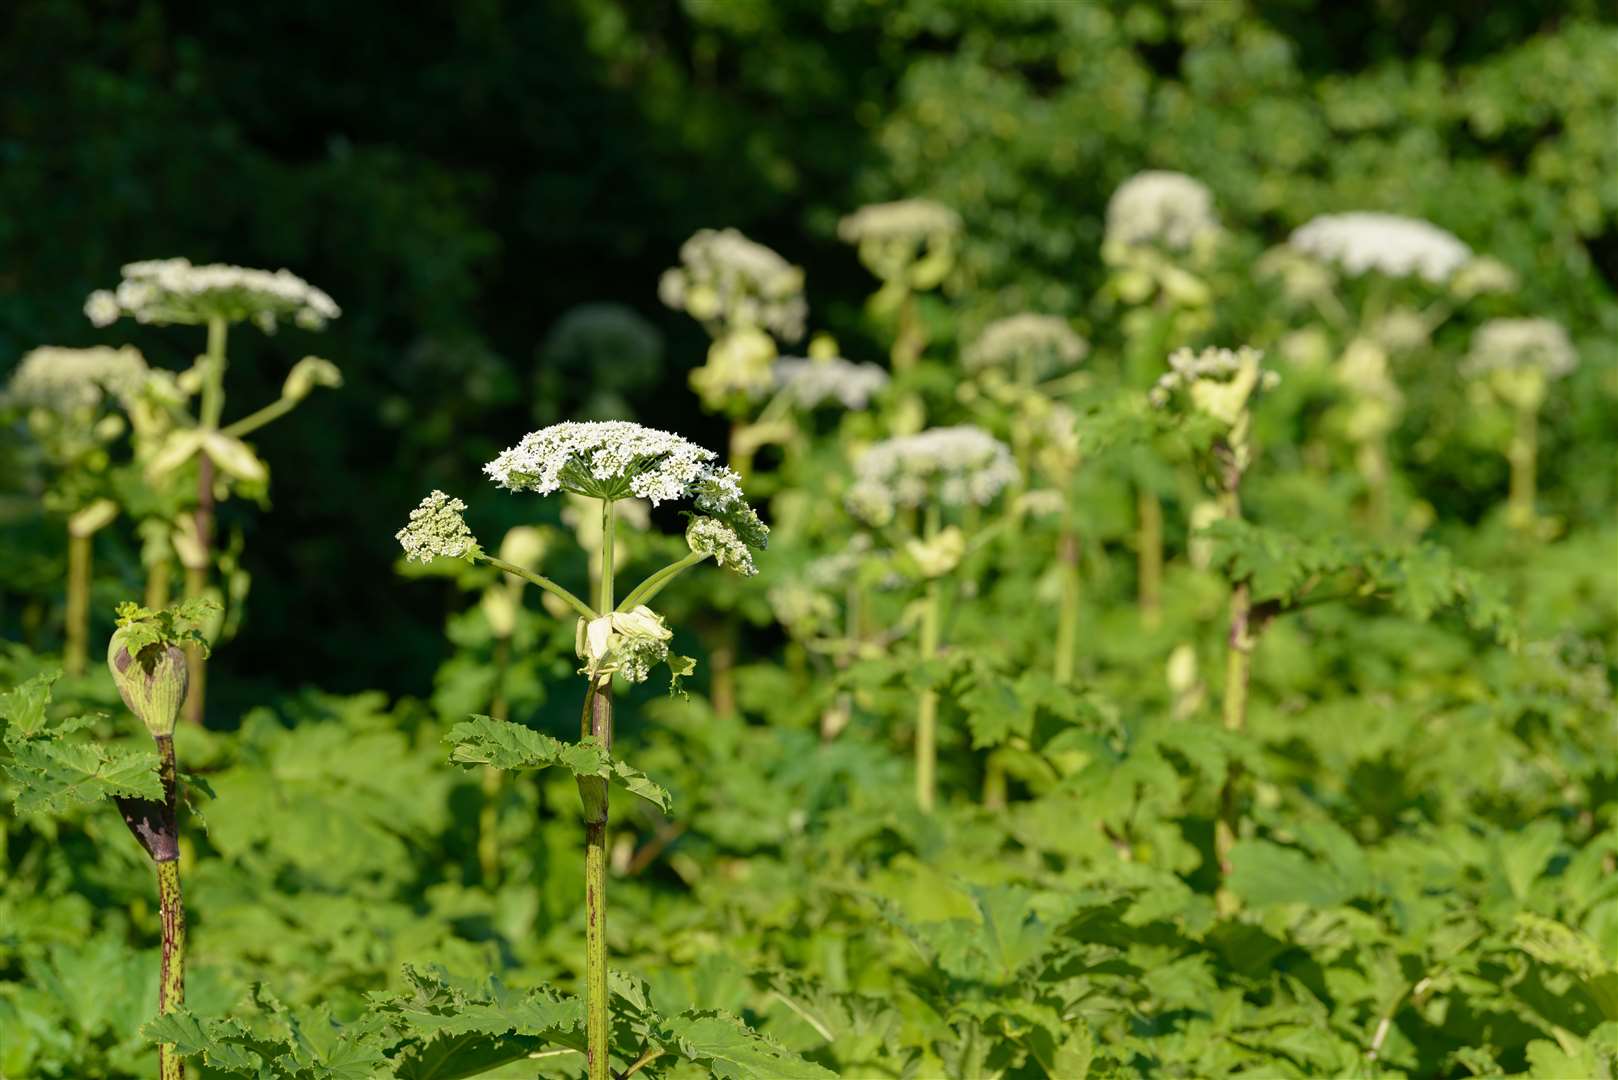 Hogweed can resemble cow parsley. Photo: Shutterstock